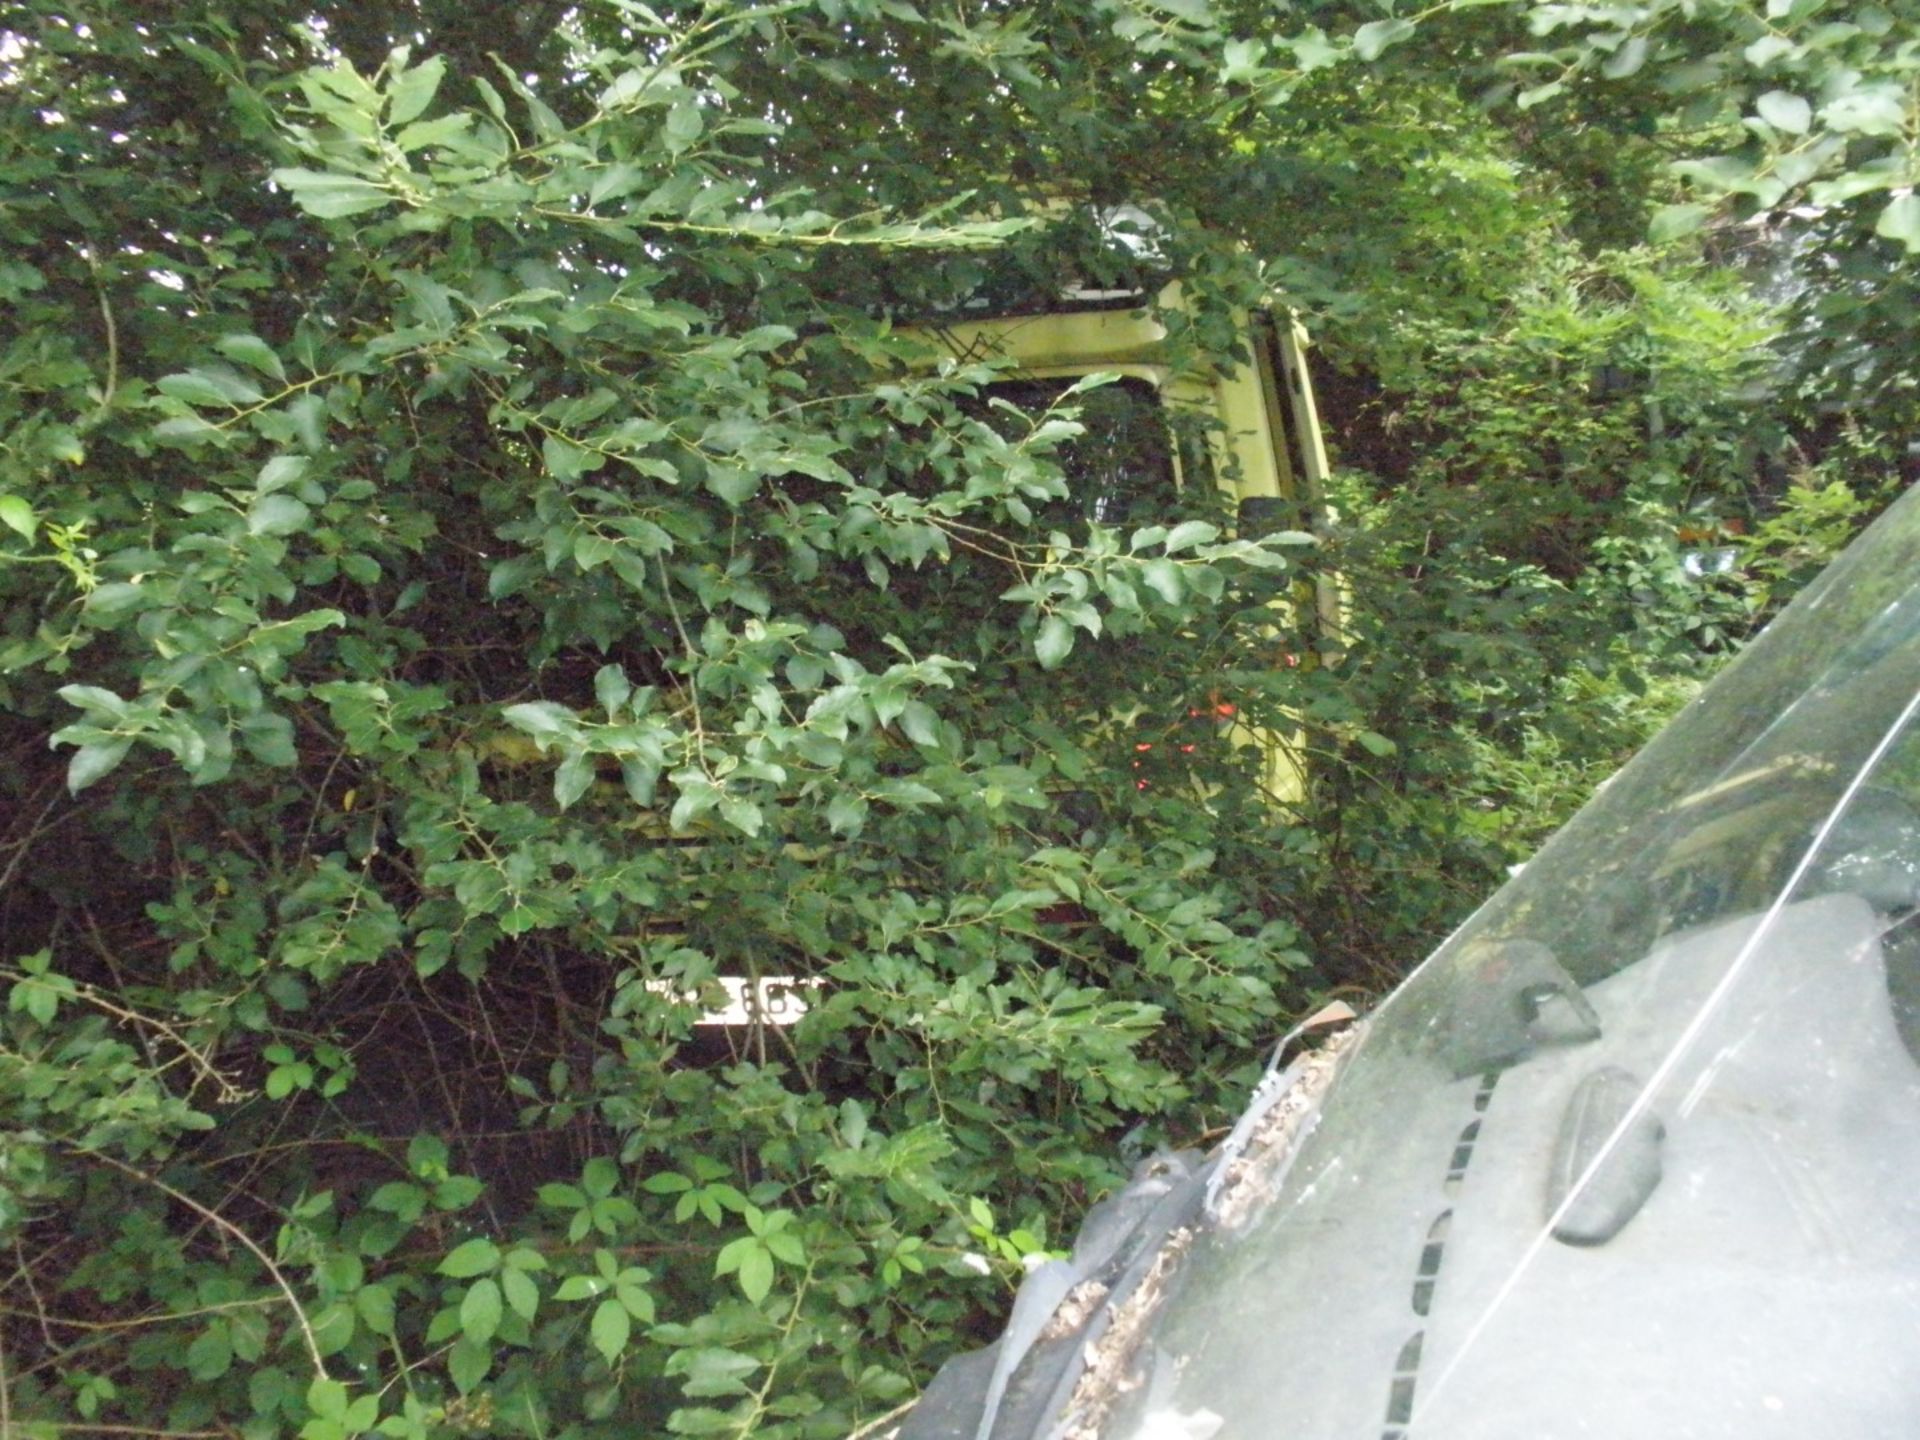 The Residual Scrap Vehicles on site together with other scrap hidden in the undergrowth. To include - Image 5 of 10